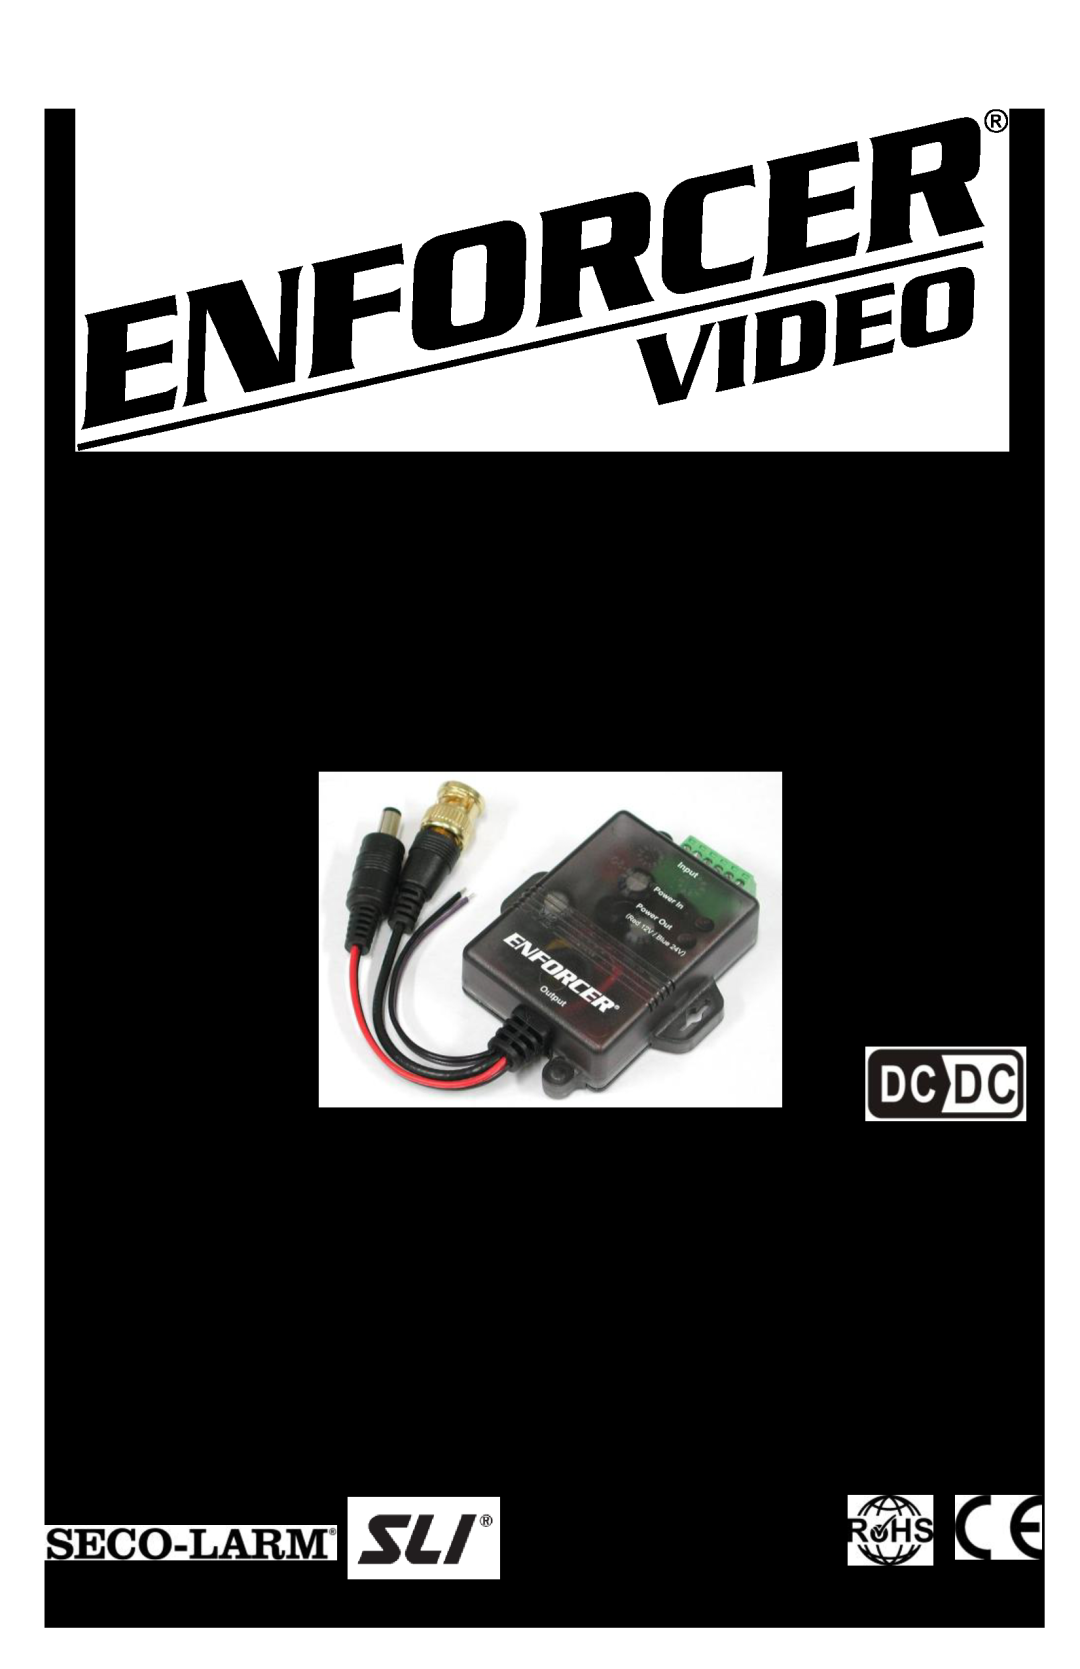 SECO-LARM USA EVT-PB1-H05Q manual Manual, Video, Power and Data Balun with Voltage Booster 